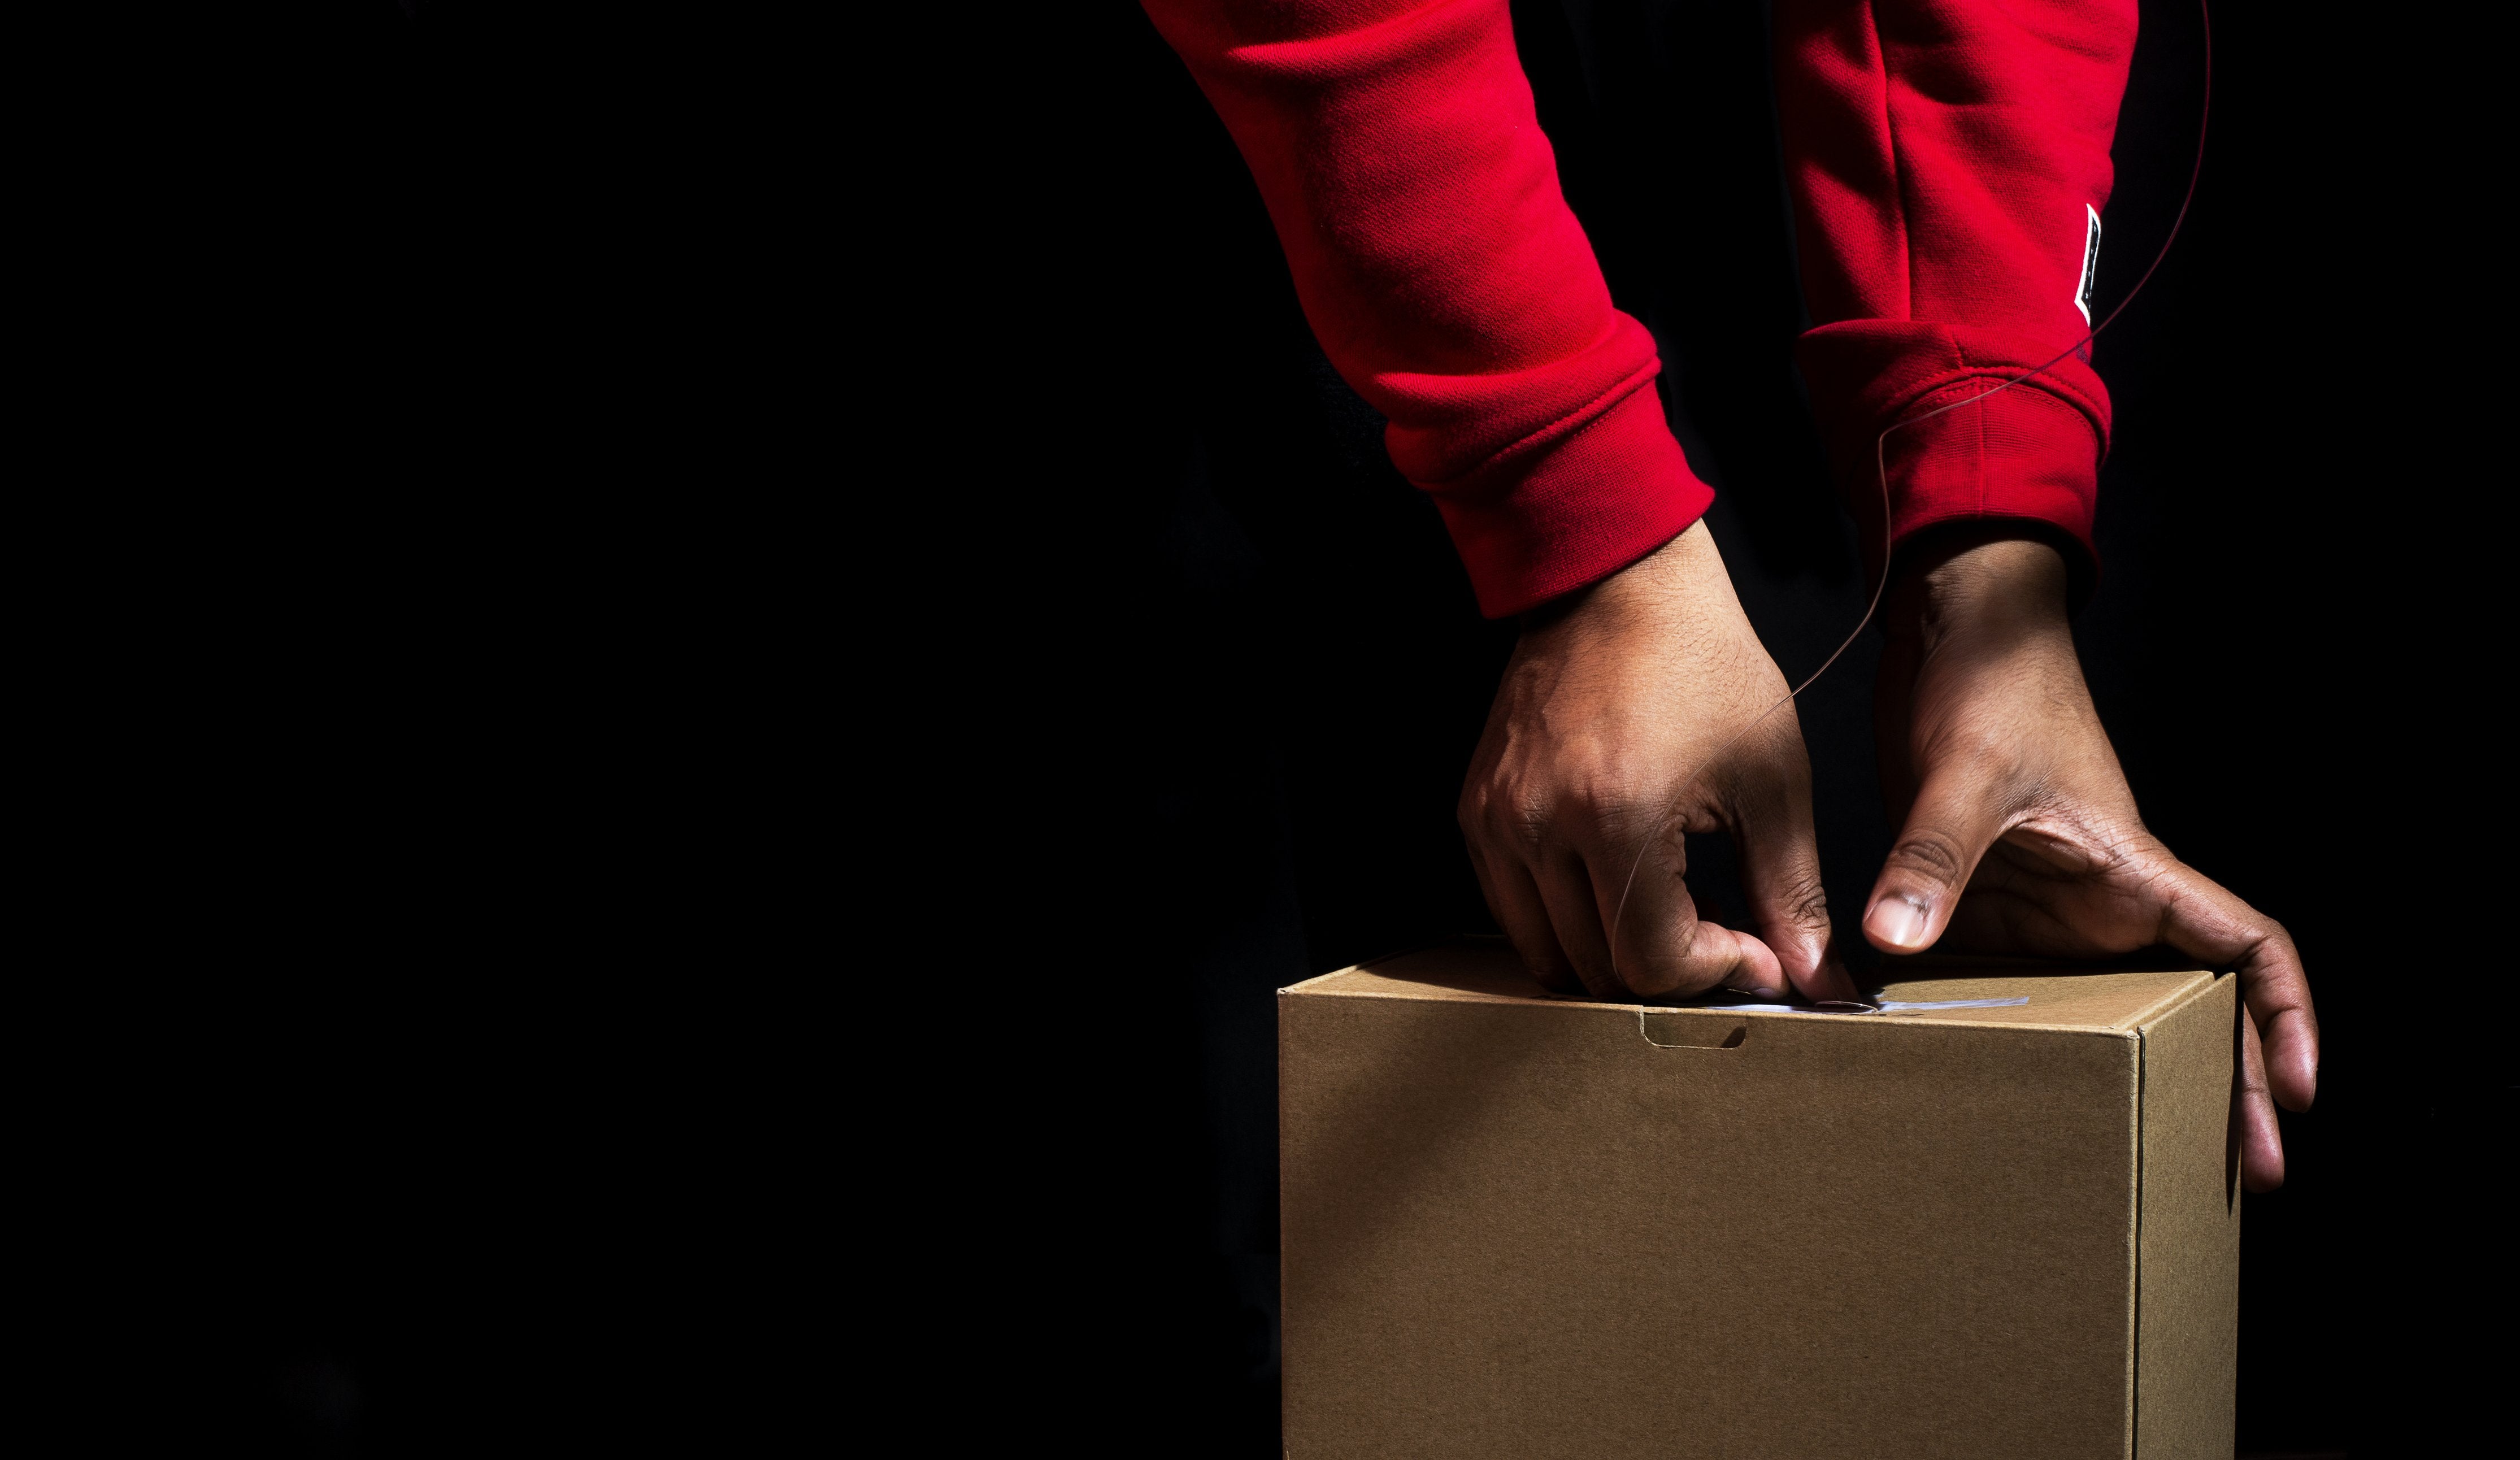 Image of a hands sealing a cardboard box with tape ready for shipping to the customer